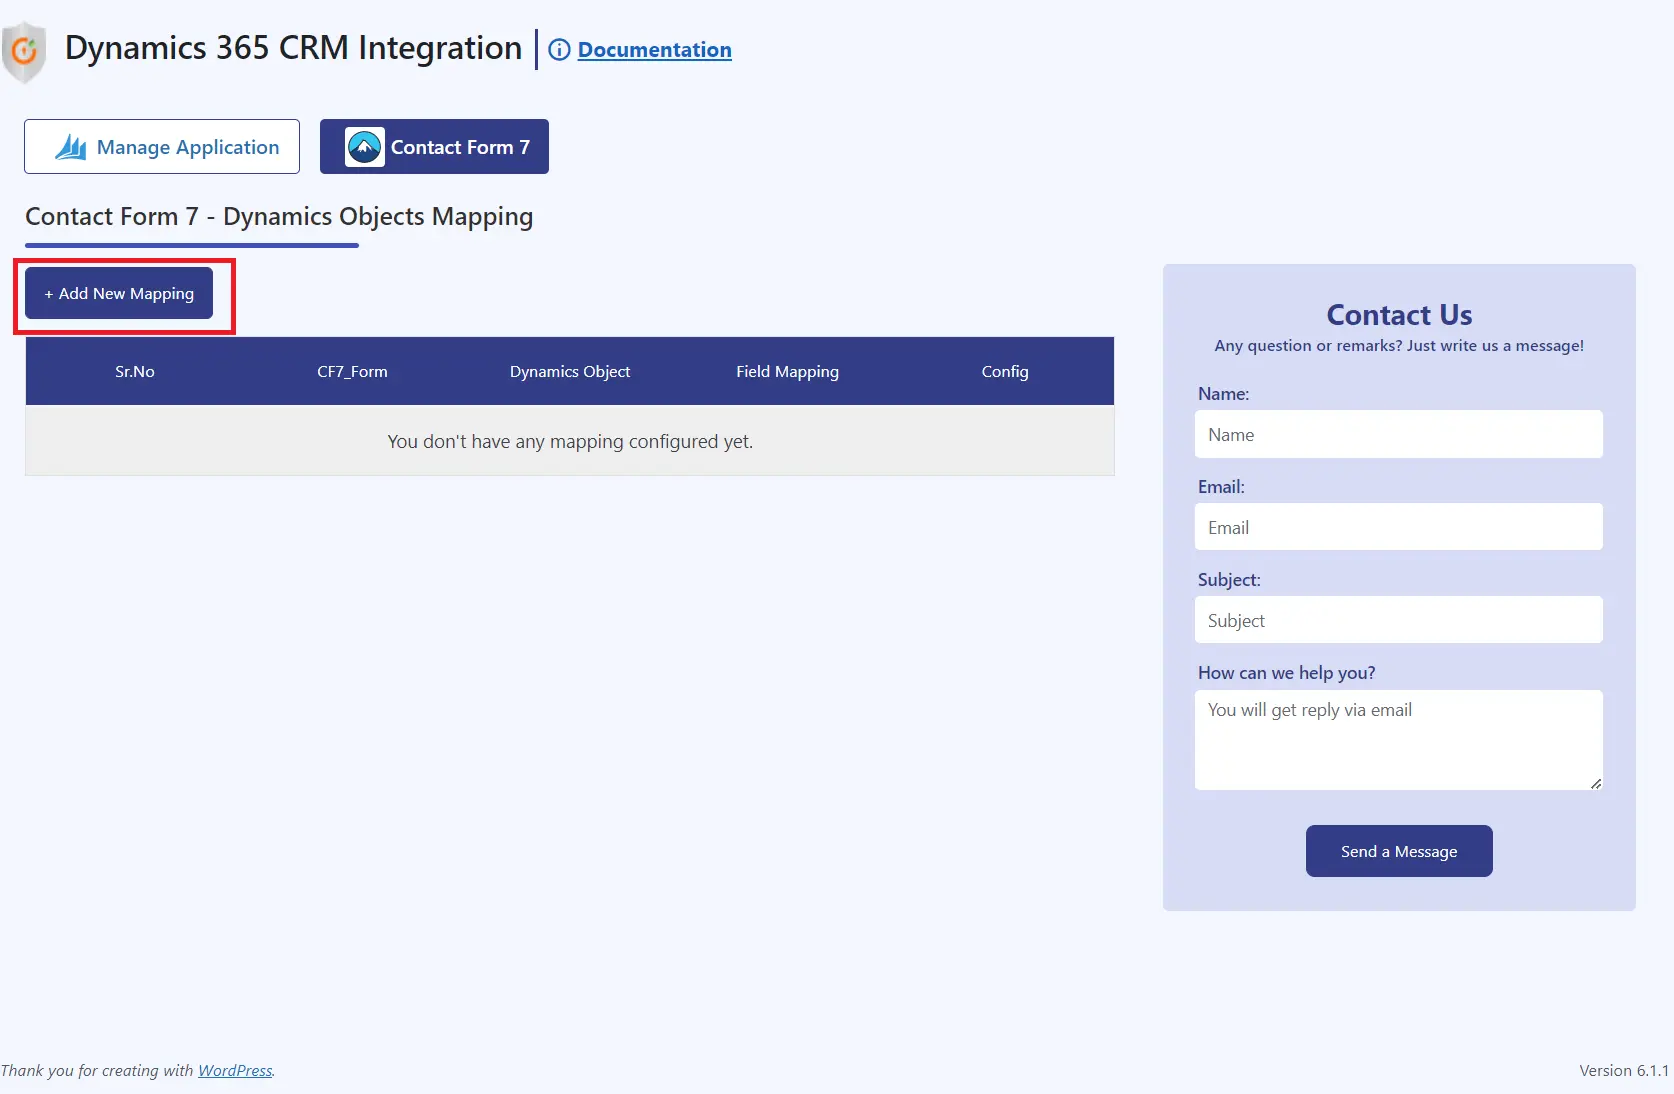 Dynamics 365 integration with WP Contact form 7 plugin | Add New mapping